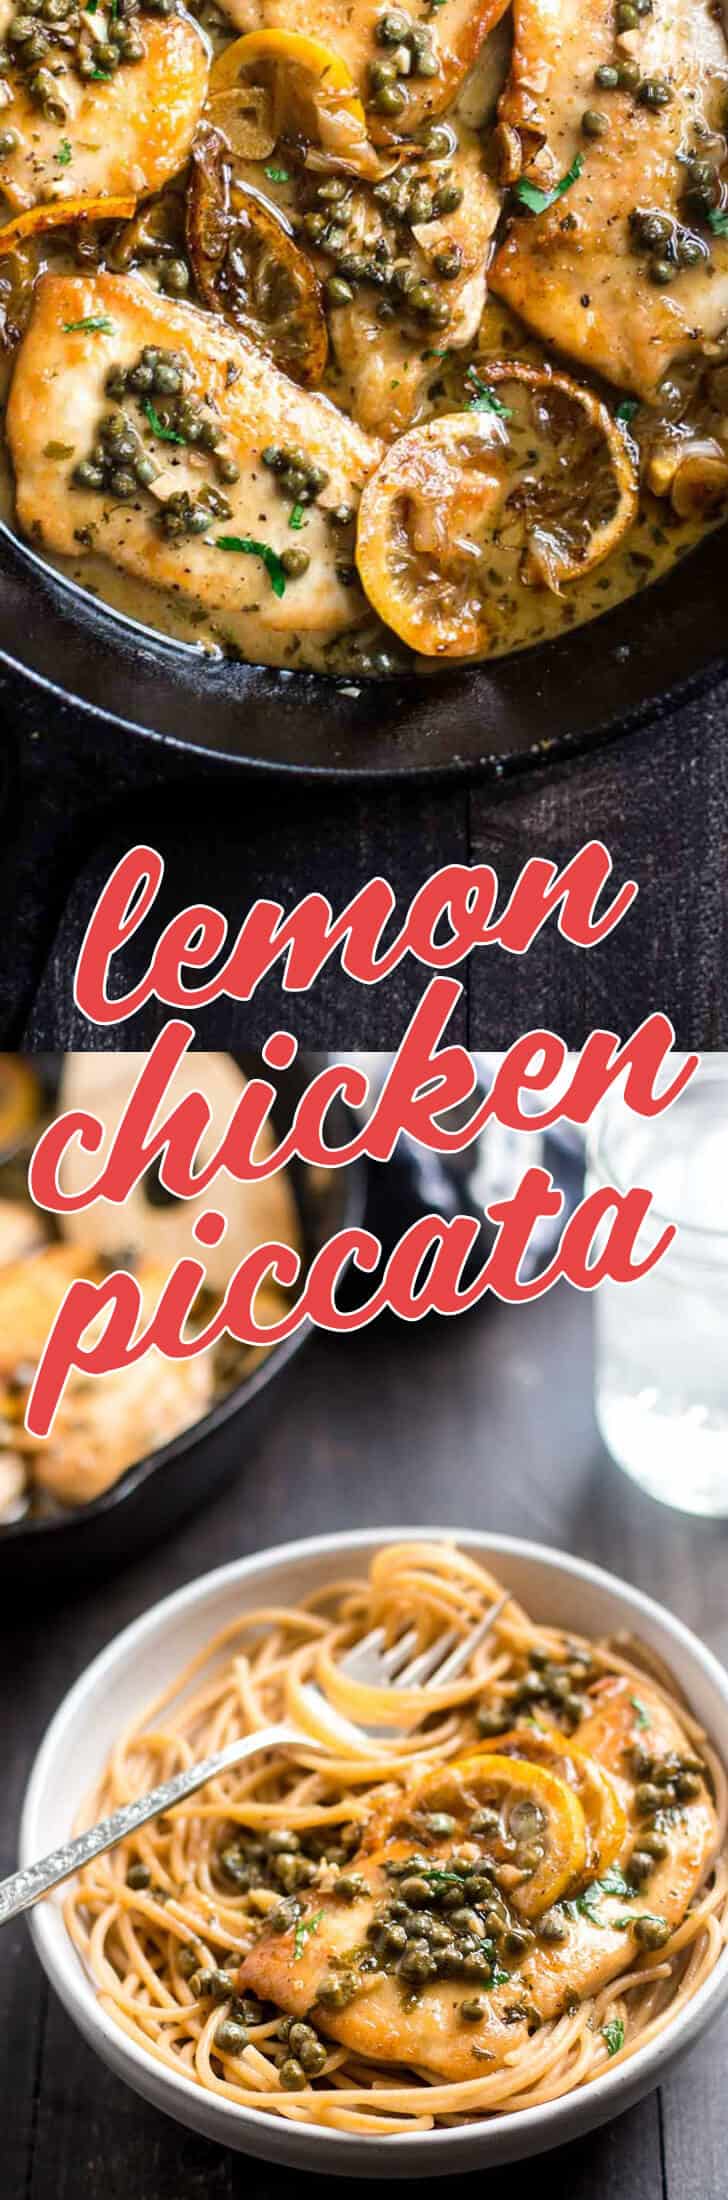 Lemon Chicken Piccata - A classic one-pan lemon chicken dish topped with capers and sweet and savory charred lemons. Great on its own or served over rice or spaghetti.